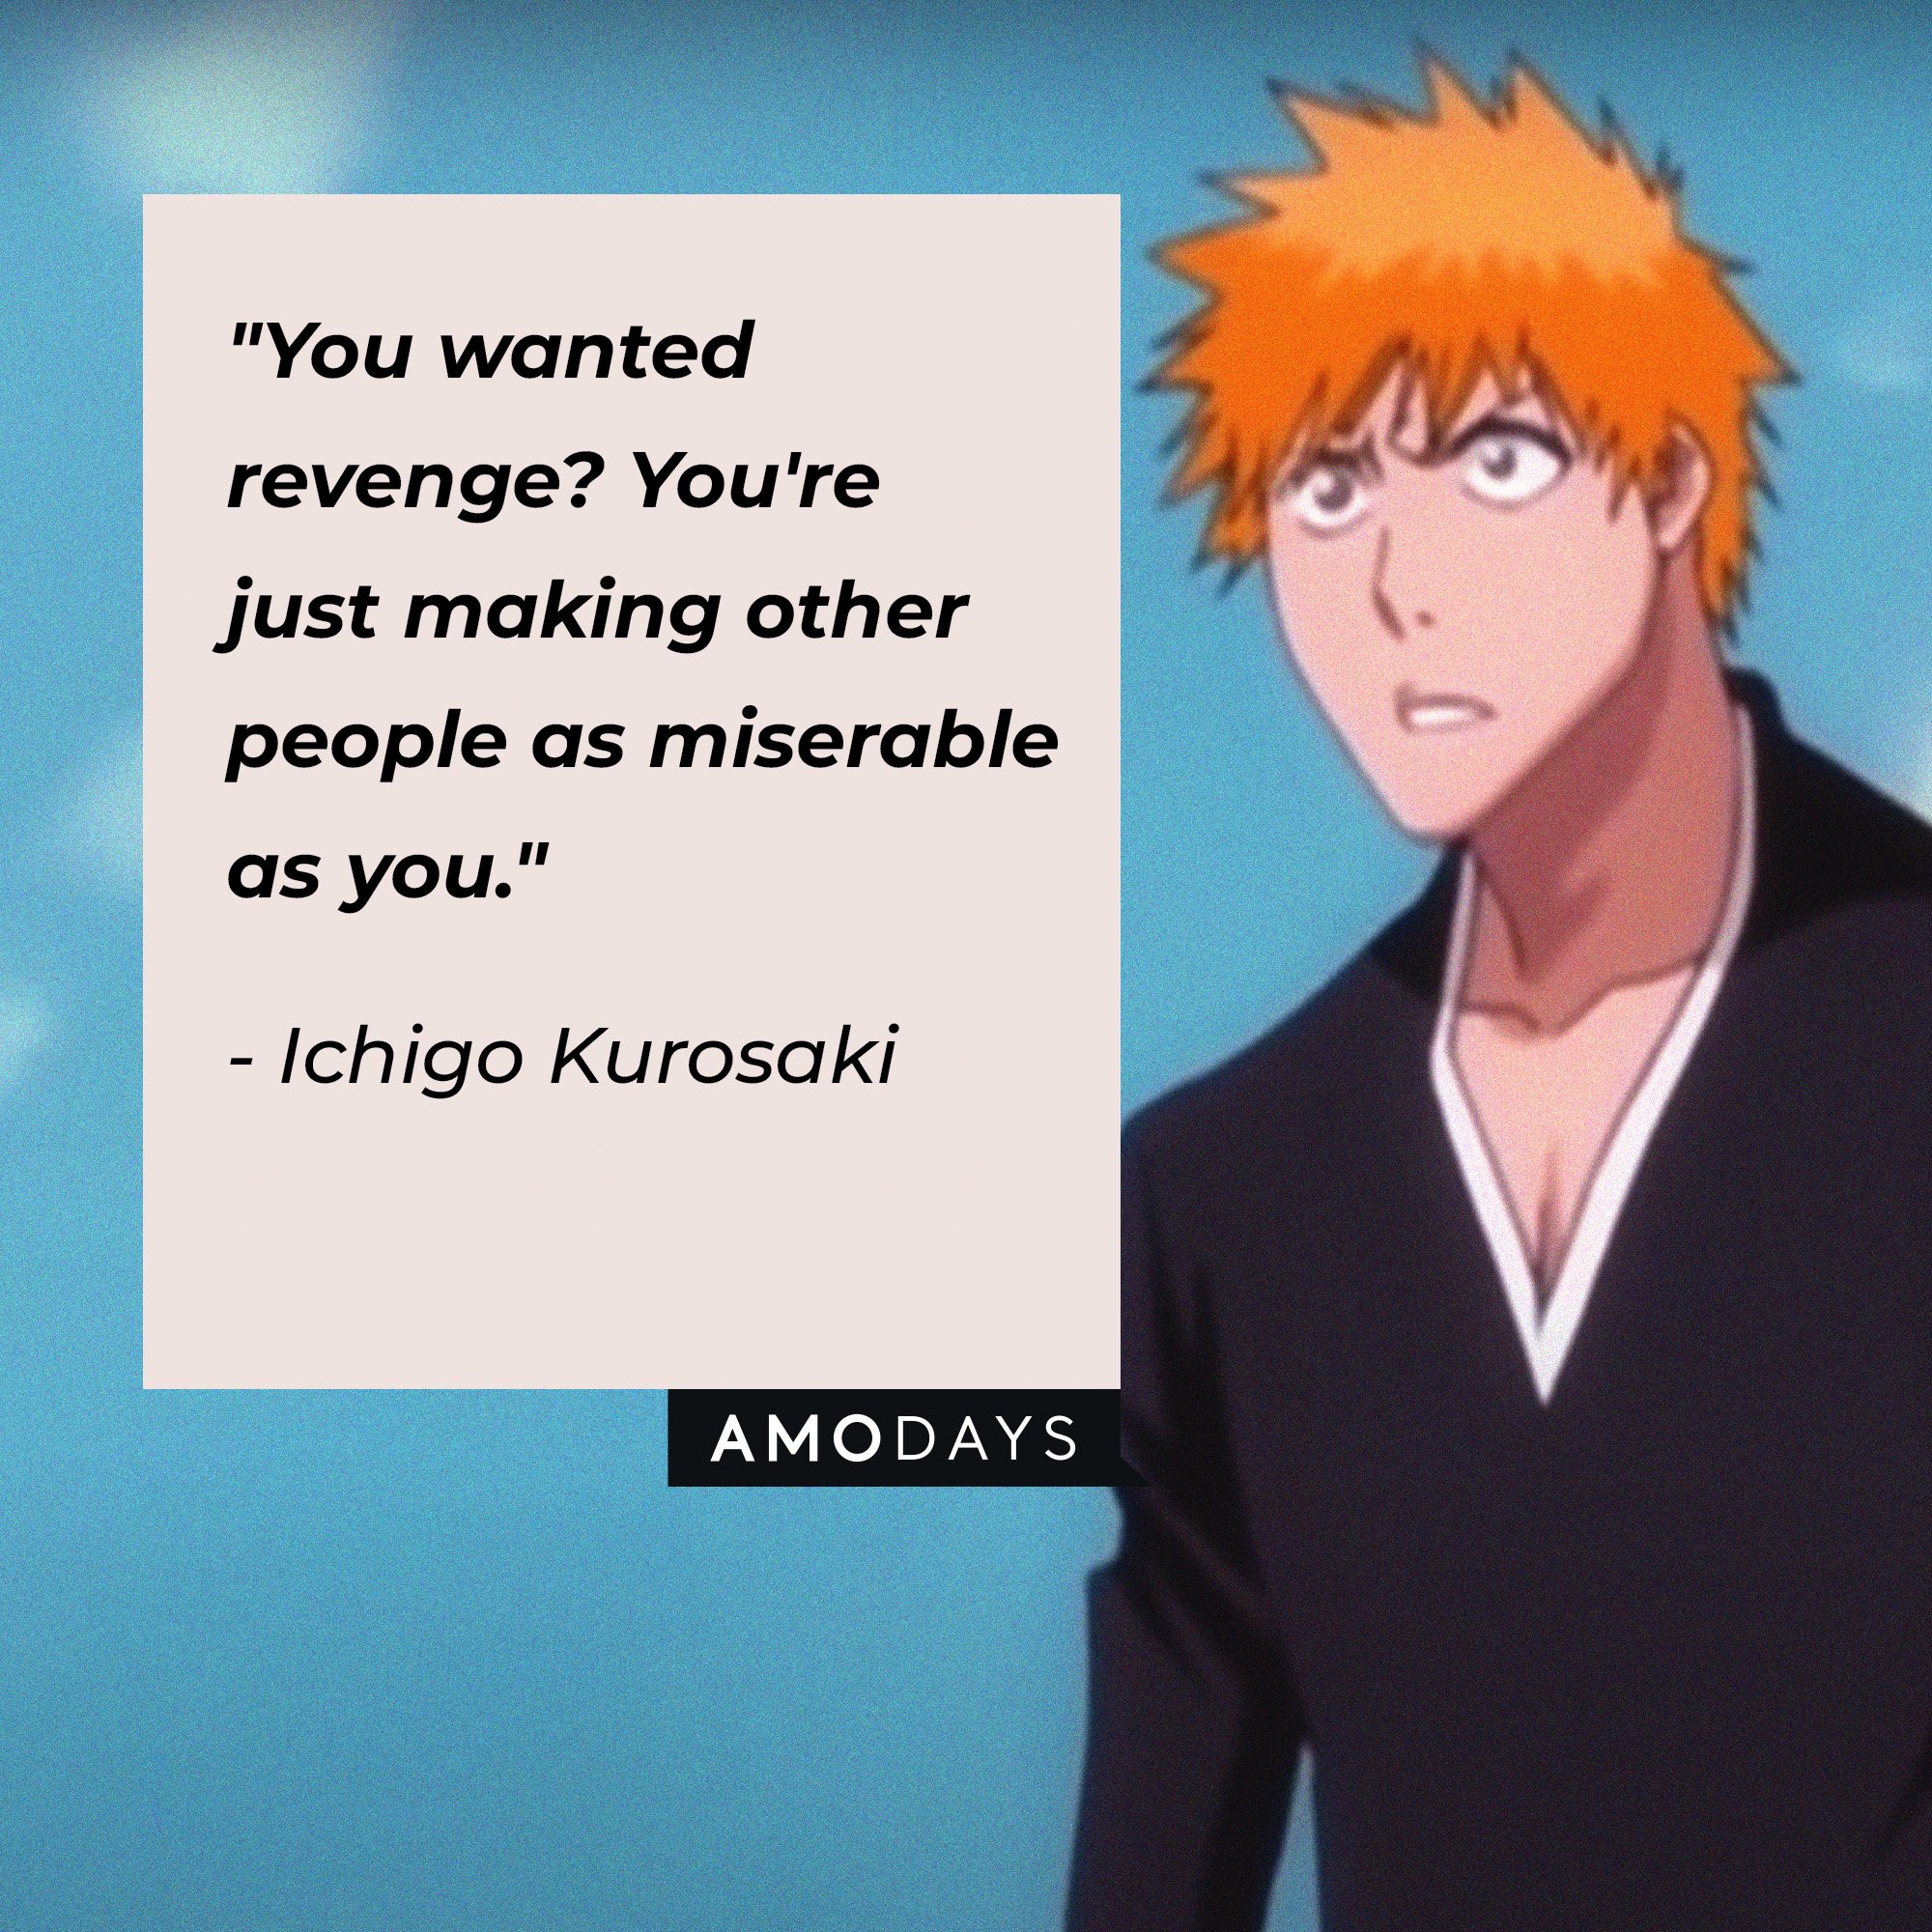 Ichigo Kurosaki’s quote: "You wanted revenge? You're just making other people as miserable as you." | Image: AmoDays